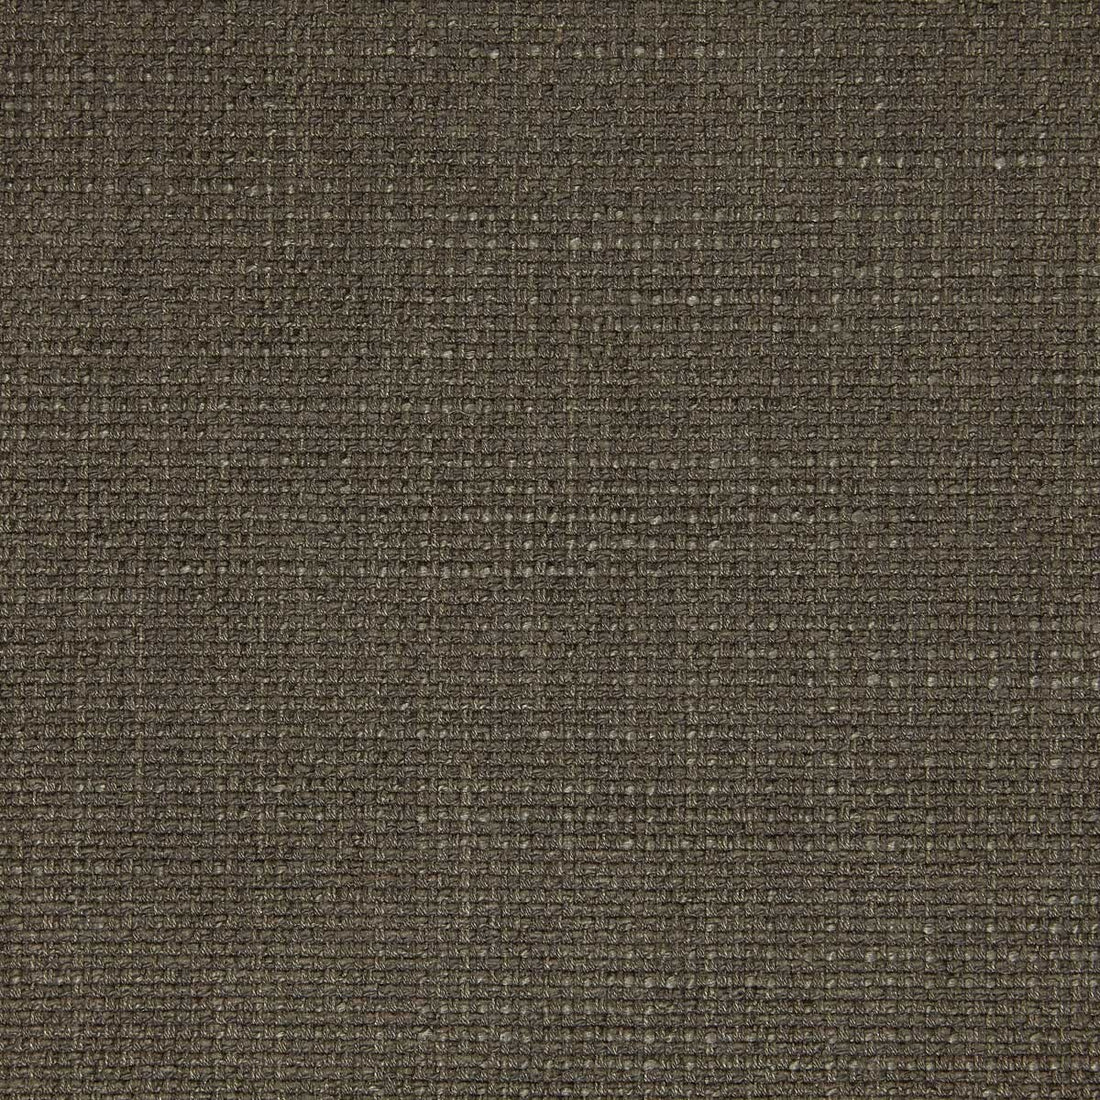 Godai fabric in 11 color - pattern LZ-30349.11.0 - by Kravet Design in the Lizzo collection